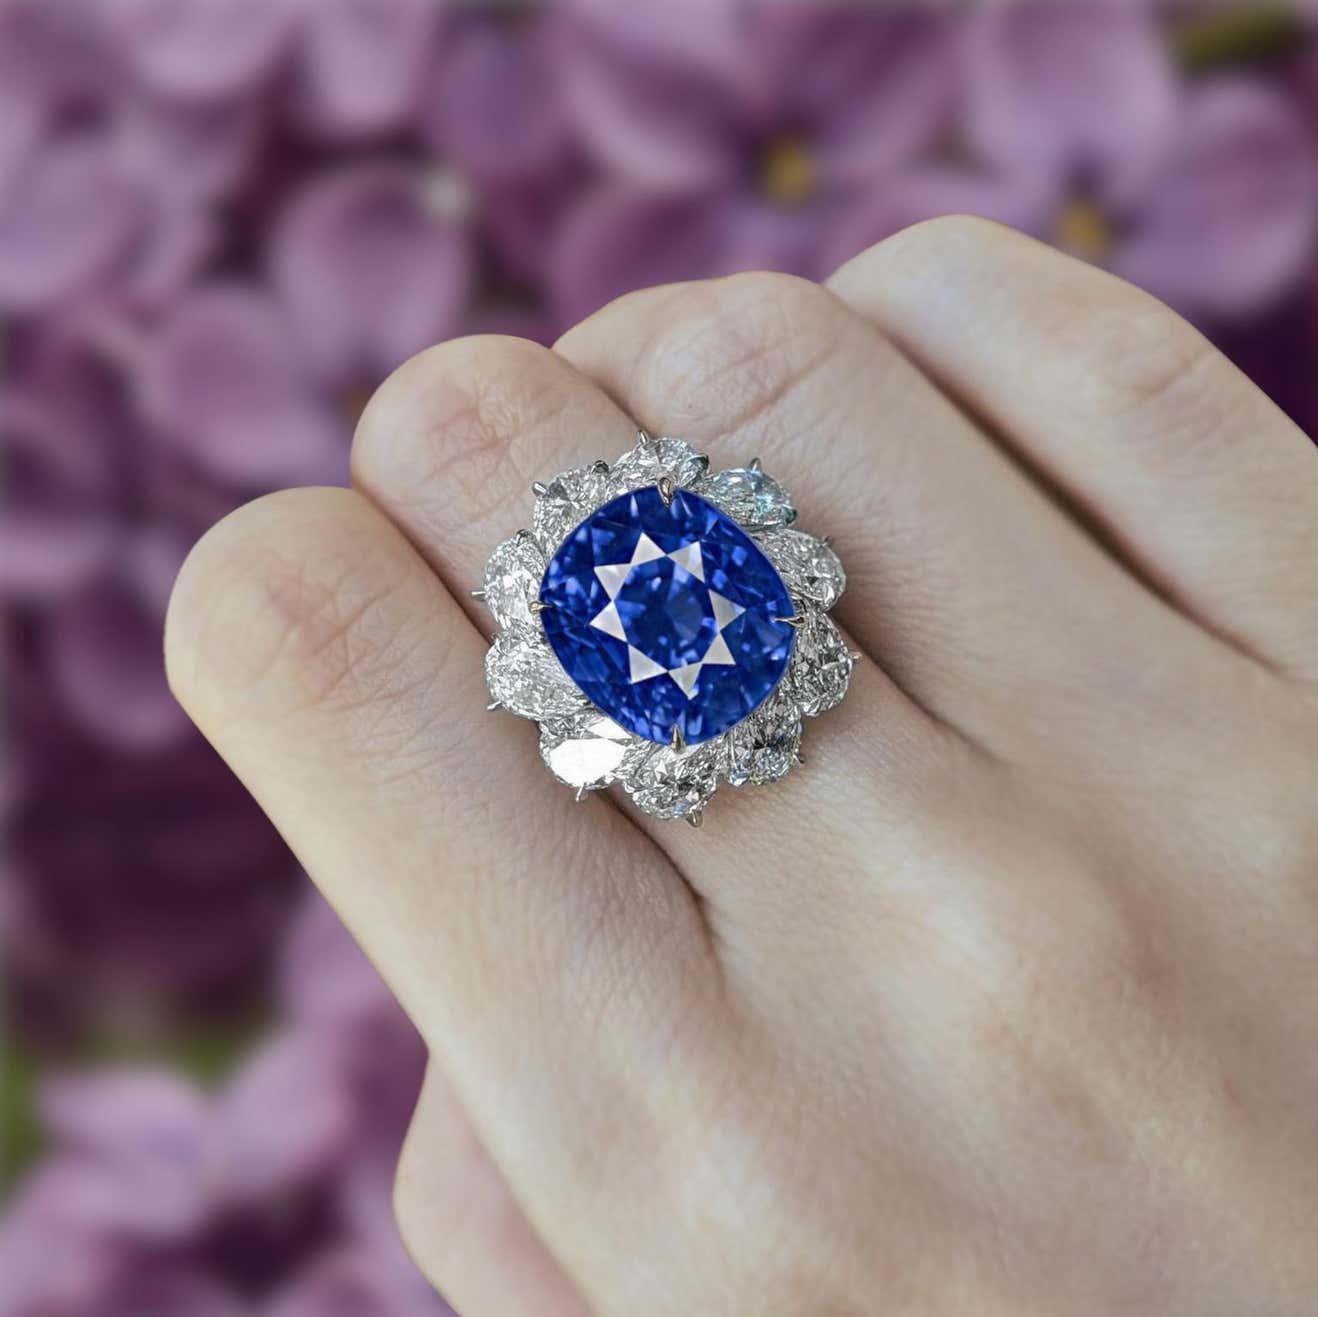 
This exquisite cushion cut authentic Kashmir sapphire is absolutely stunning.

Displaying the lustrous, velvety blue hue so beloved in these rare kashmir gemstones, this rare and important sapphire is completely untreated.

Having an extraordinary